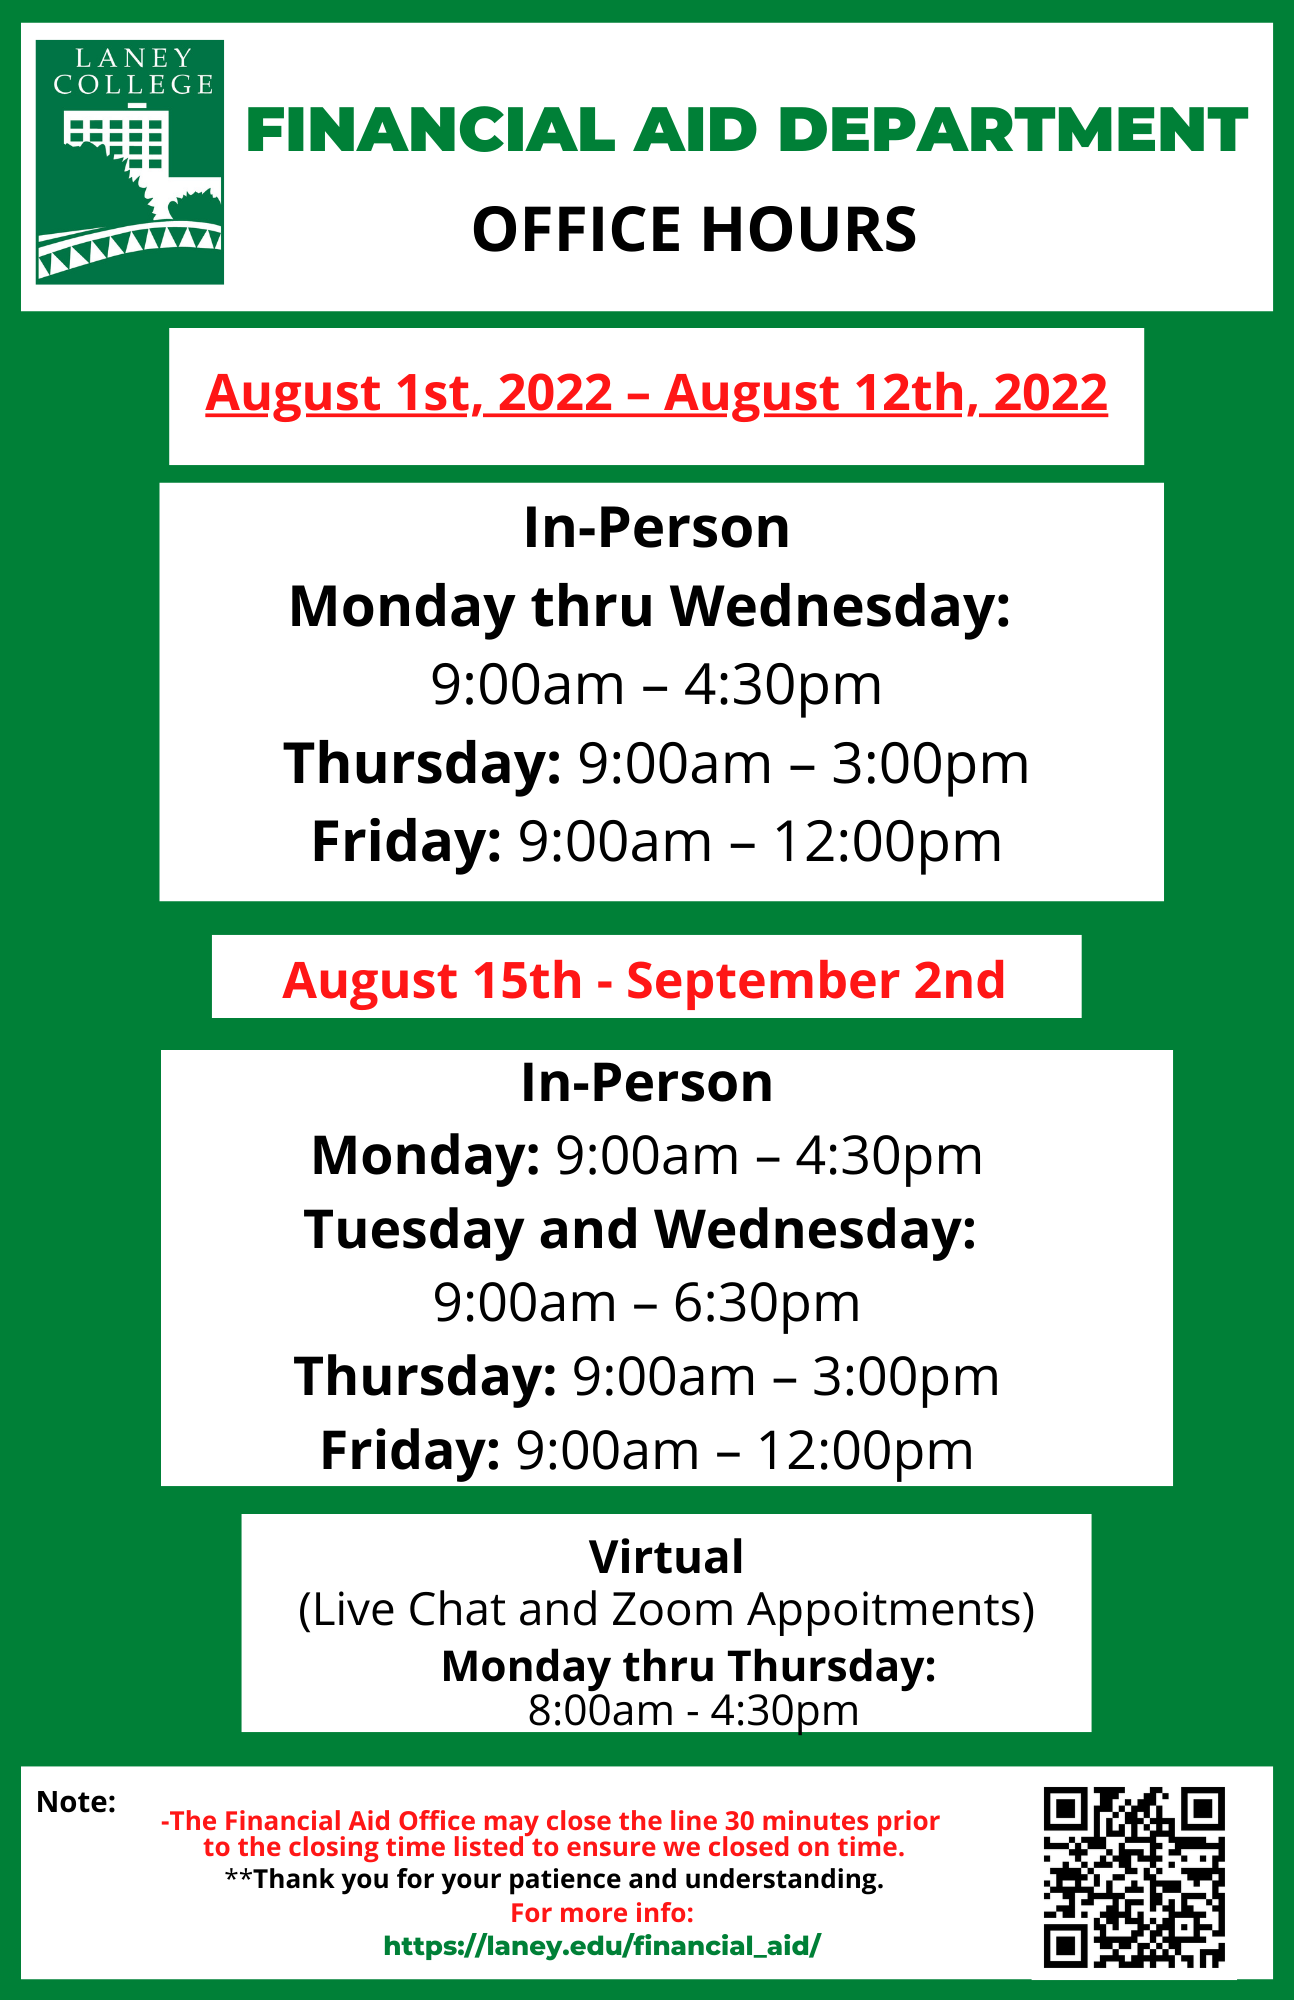 Laney College Fall Financial Aid Office Hours. Financial Aid